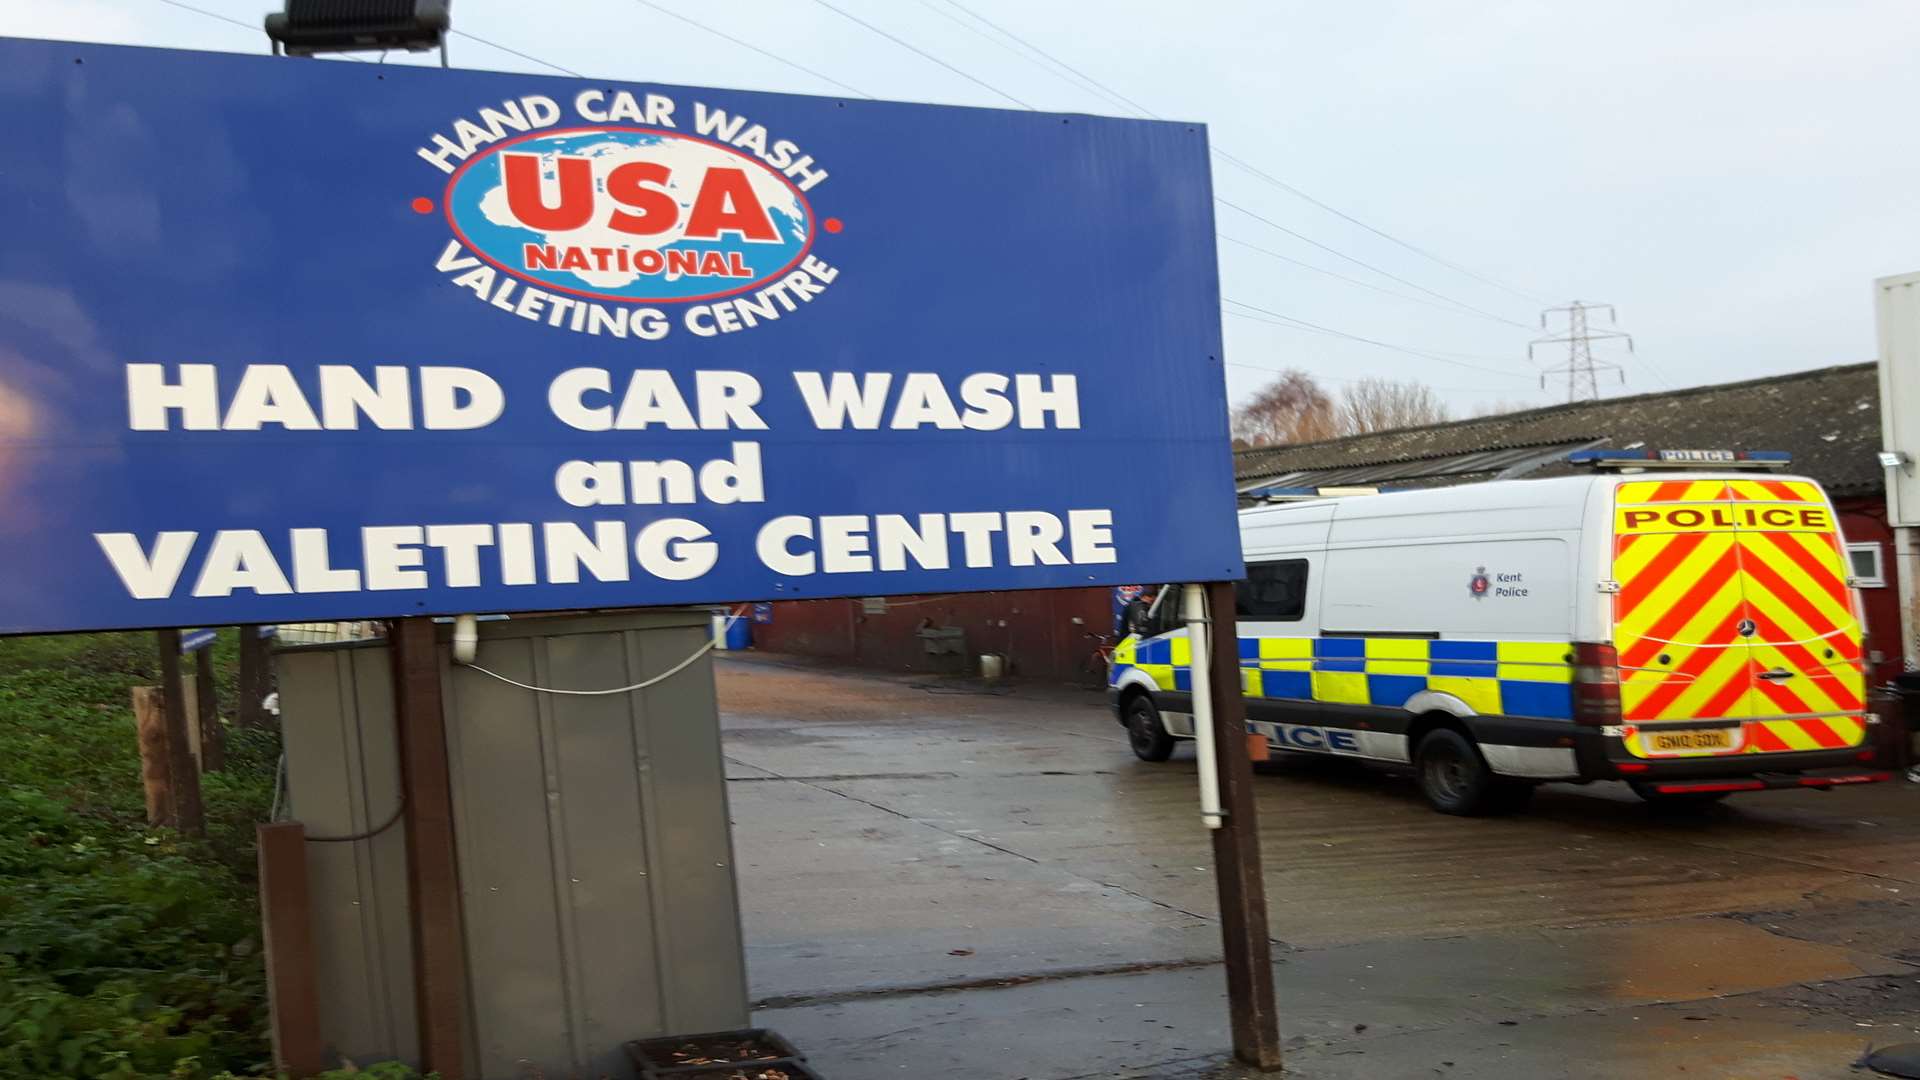 The USA Hand Car Wash in Broad Oak Road